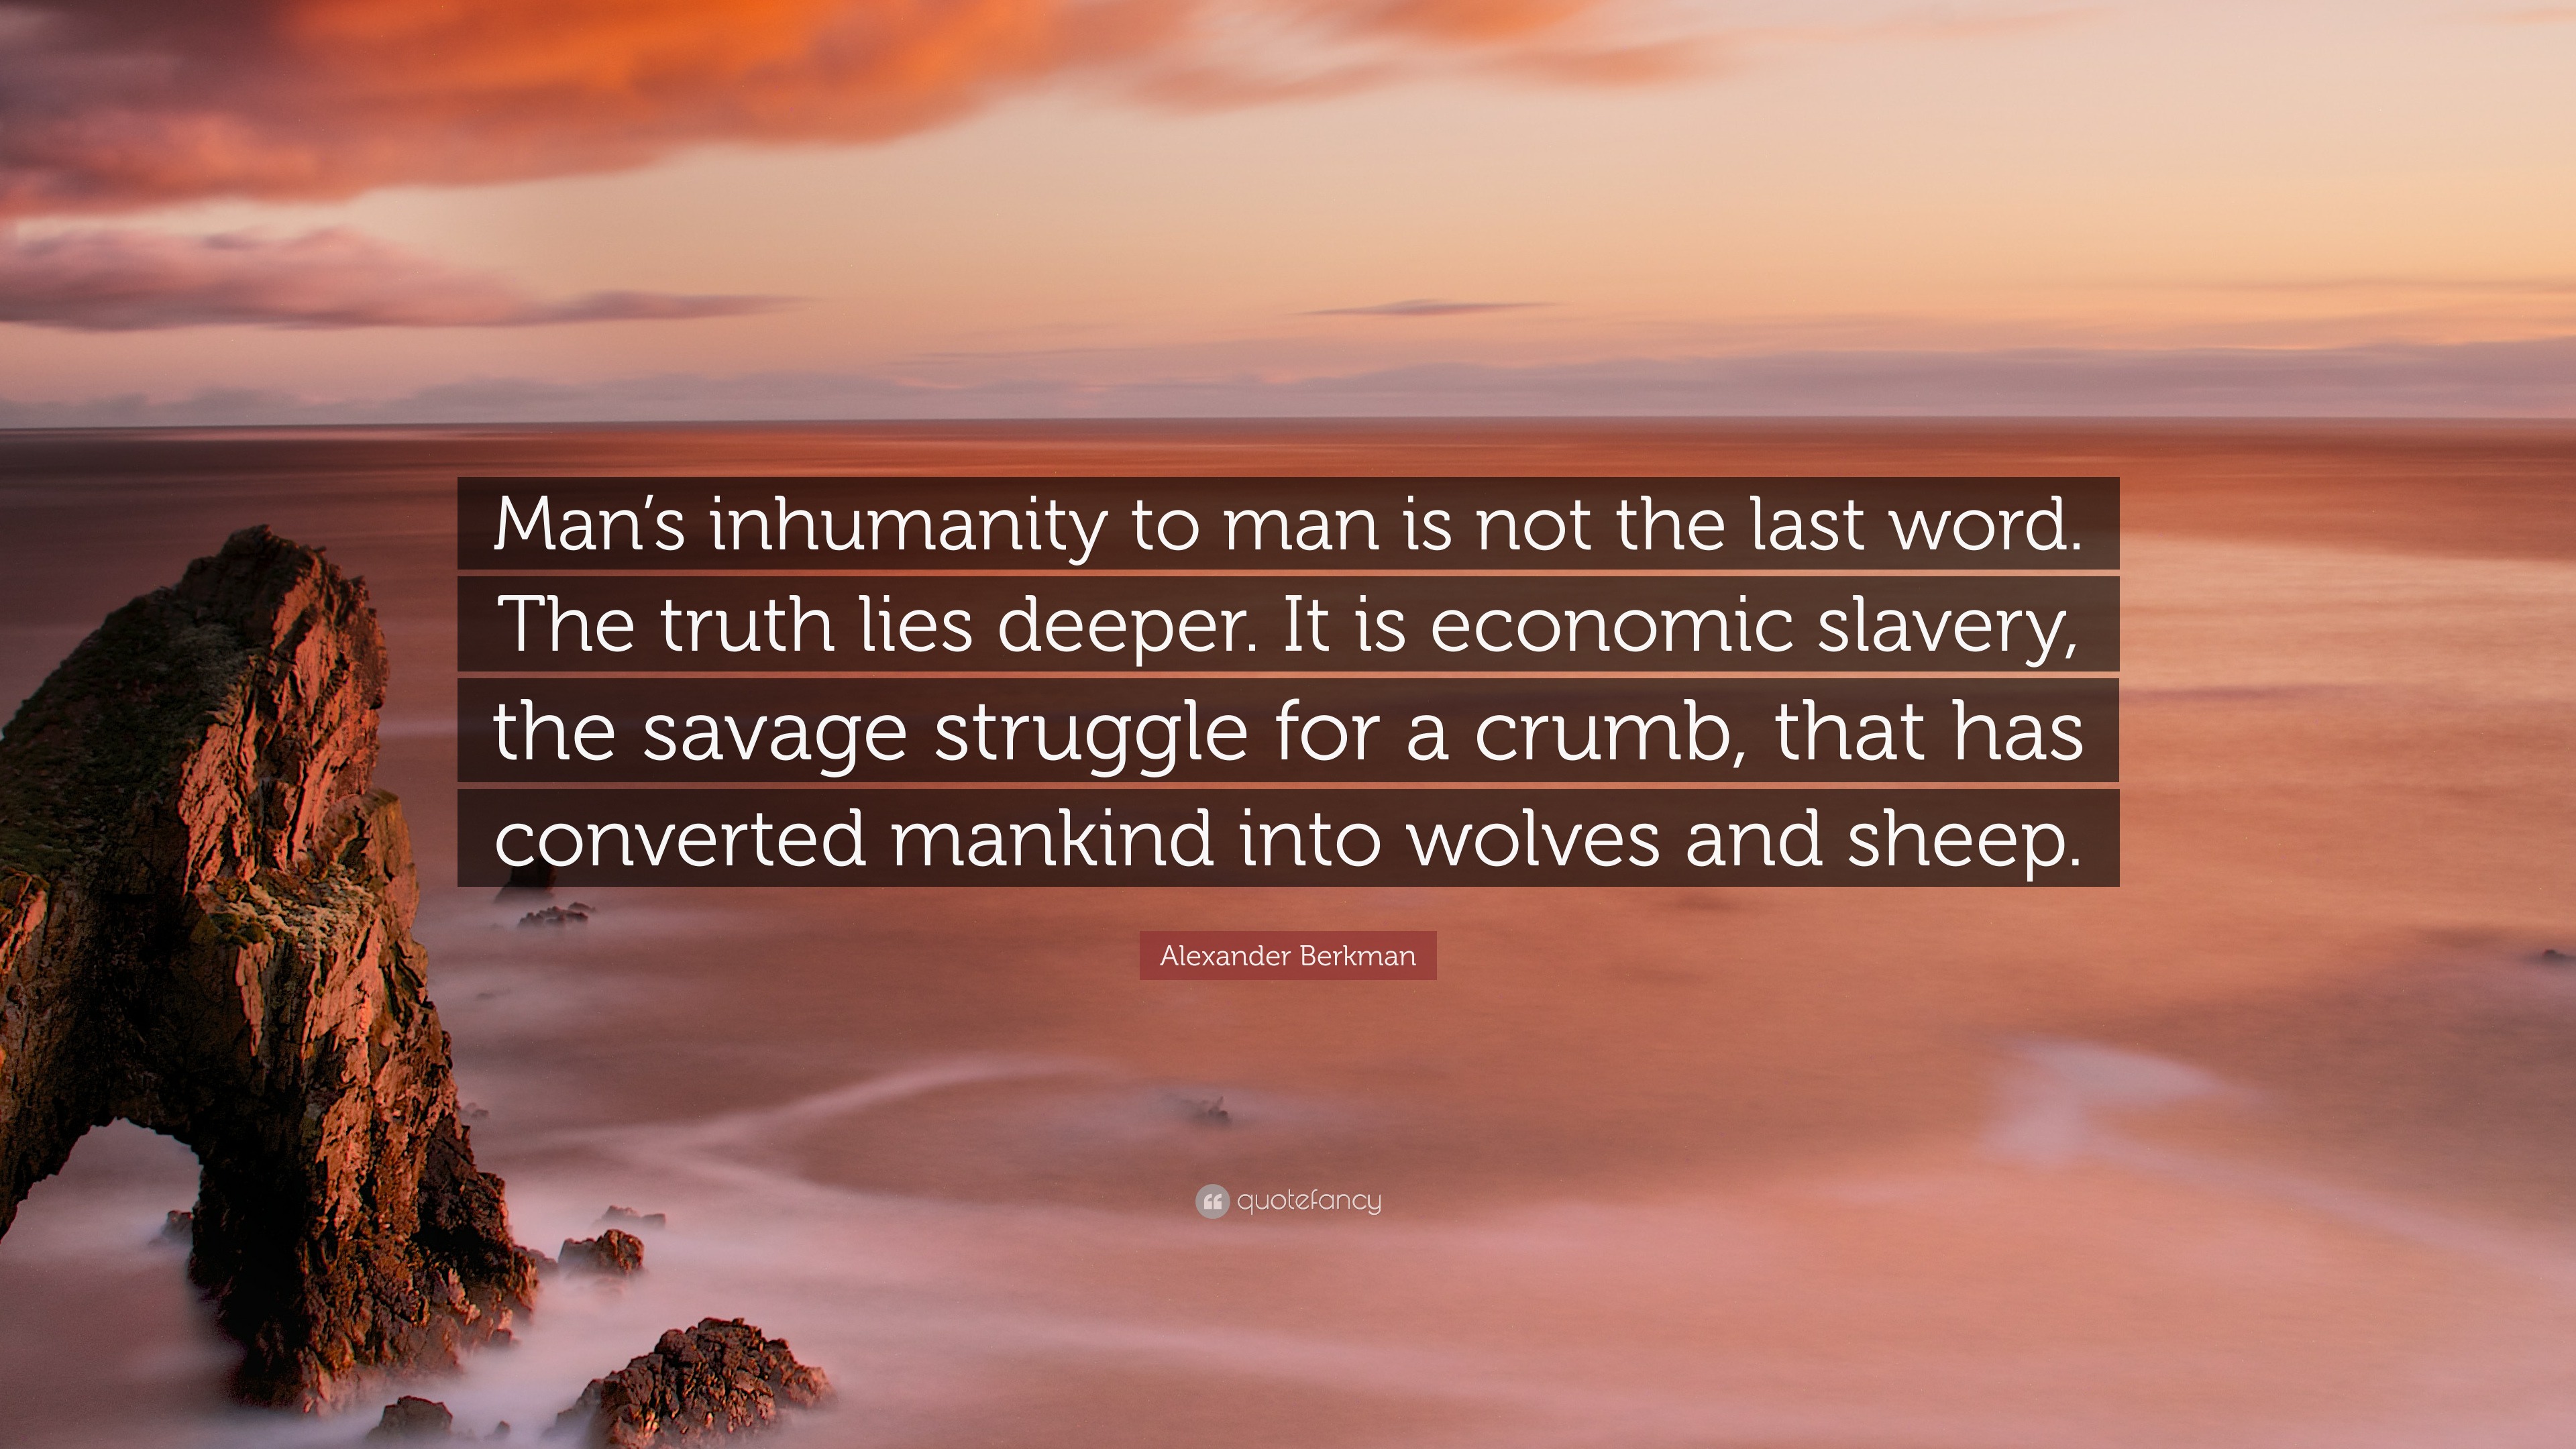 Alexander Berkman Quote: “Man's Inhumanity To Man Is Not The Last Word. The Truth Lies Deeper. It Is Economic Slavery, The Savage Struggle For A C...”